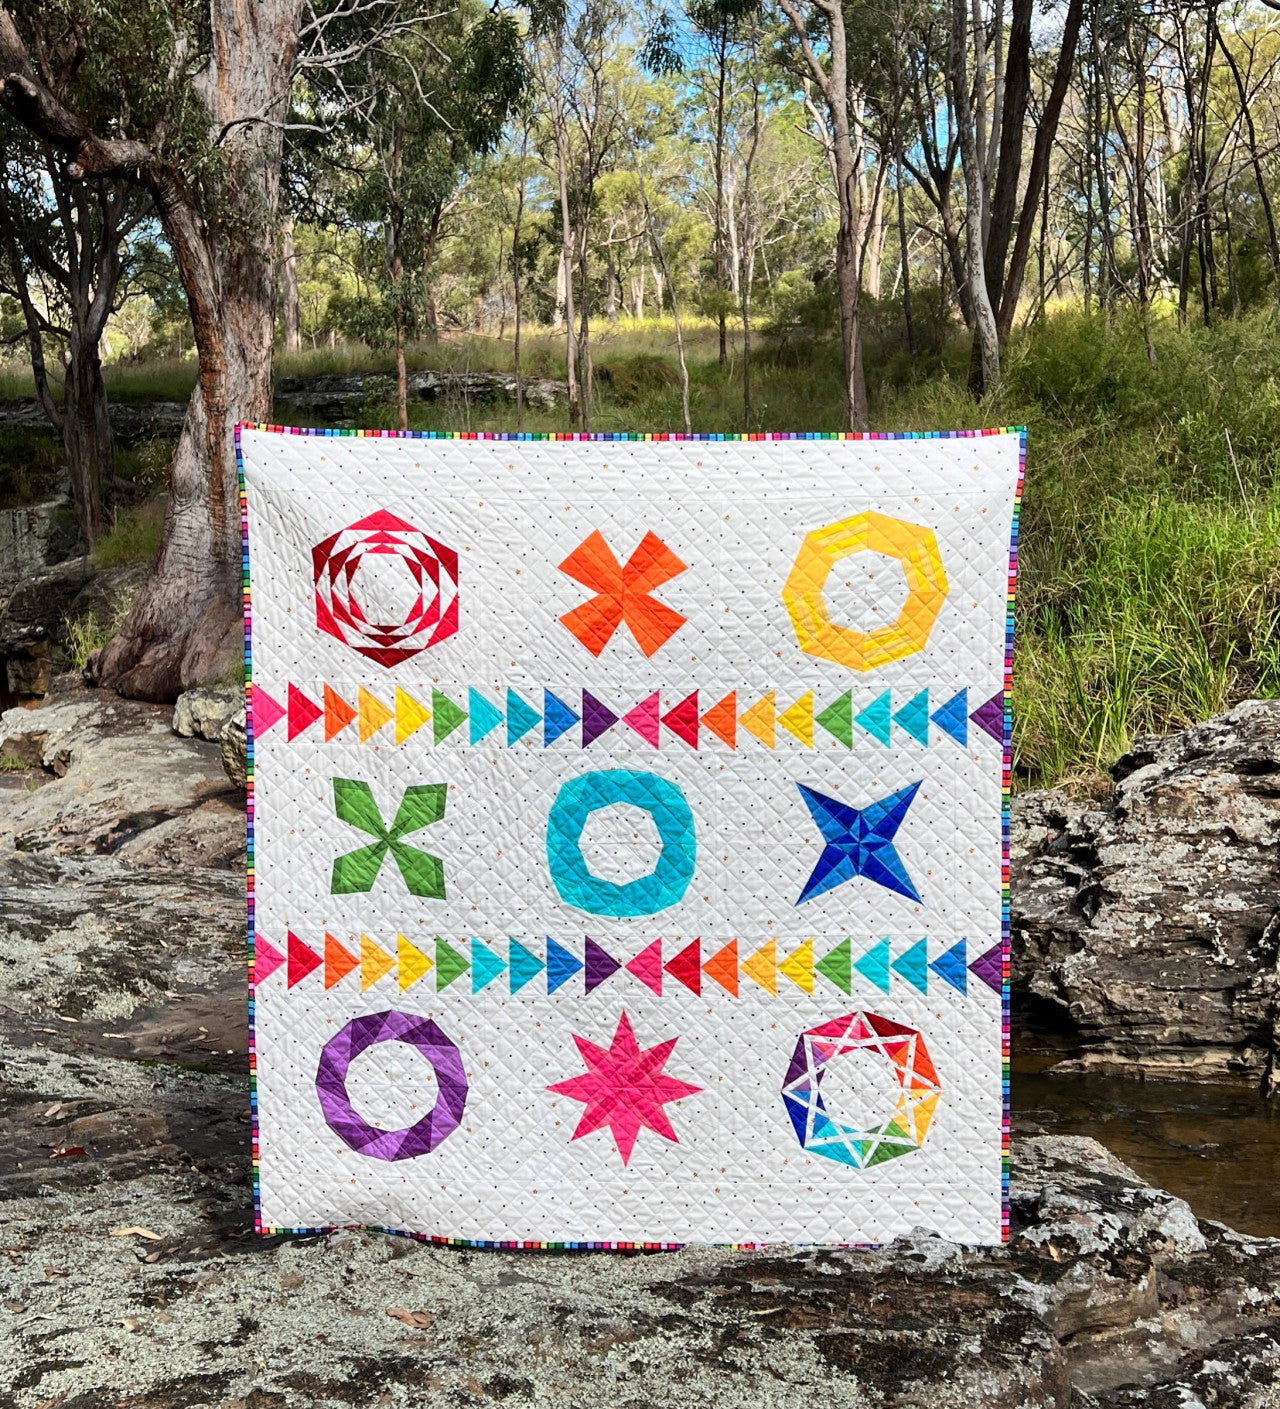 A quilt sewed from bright geometric foundation piece designs